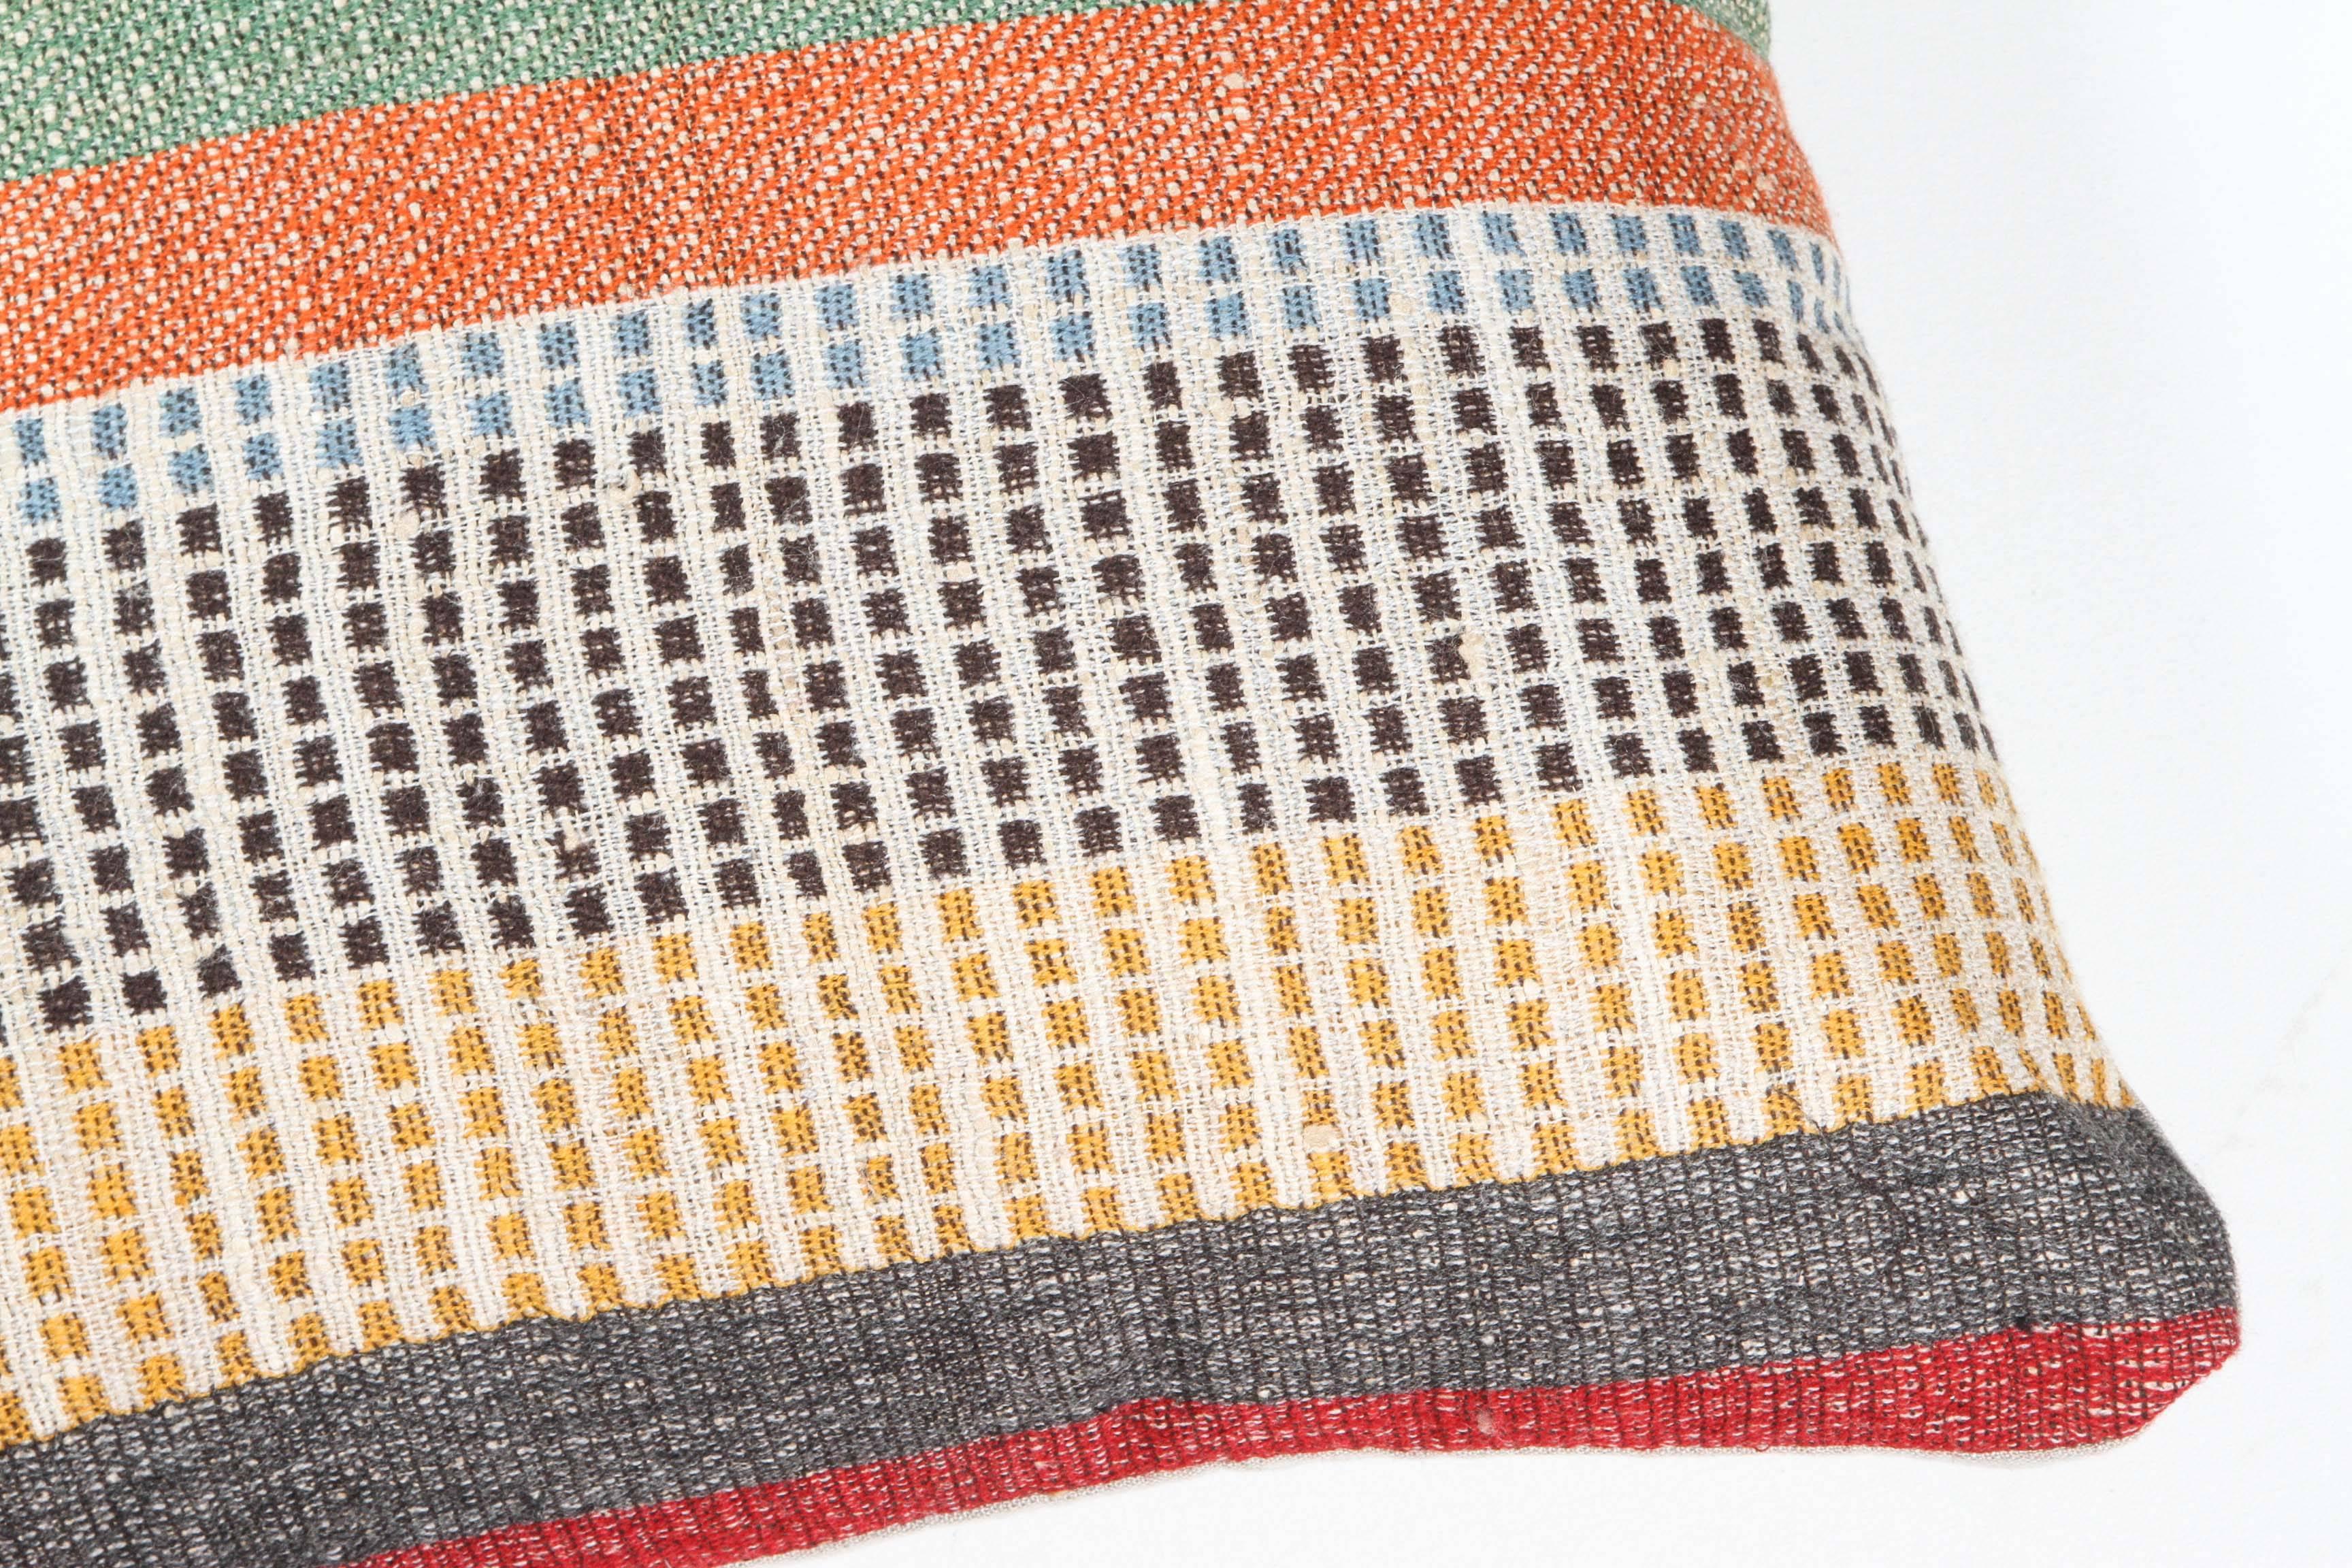 A contemporary line of cushions, pillows, throws, bedcovers, bedspreads and yardage hand woven in India on antique Jacquard looms. Handspun wool, cotton, linen, and raw silk give the textiles an appealing uneven quality.

This wool and raw Tussar